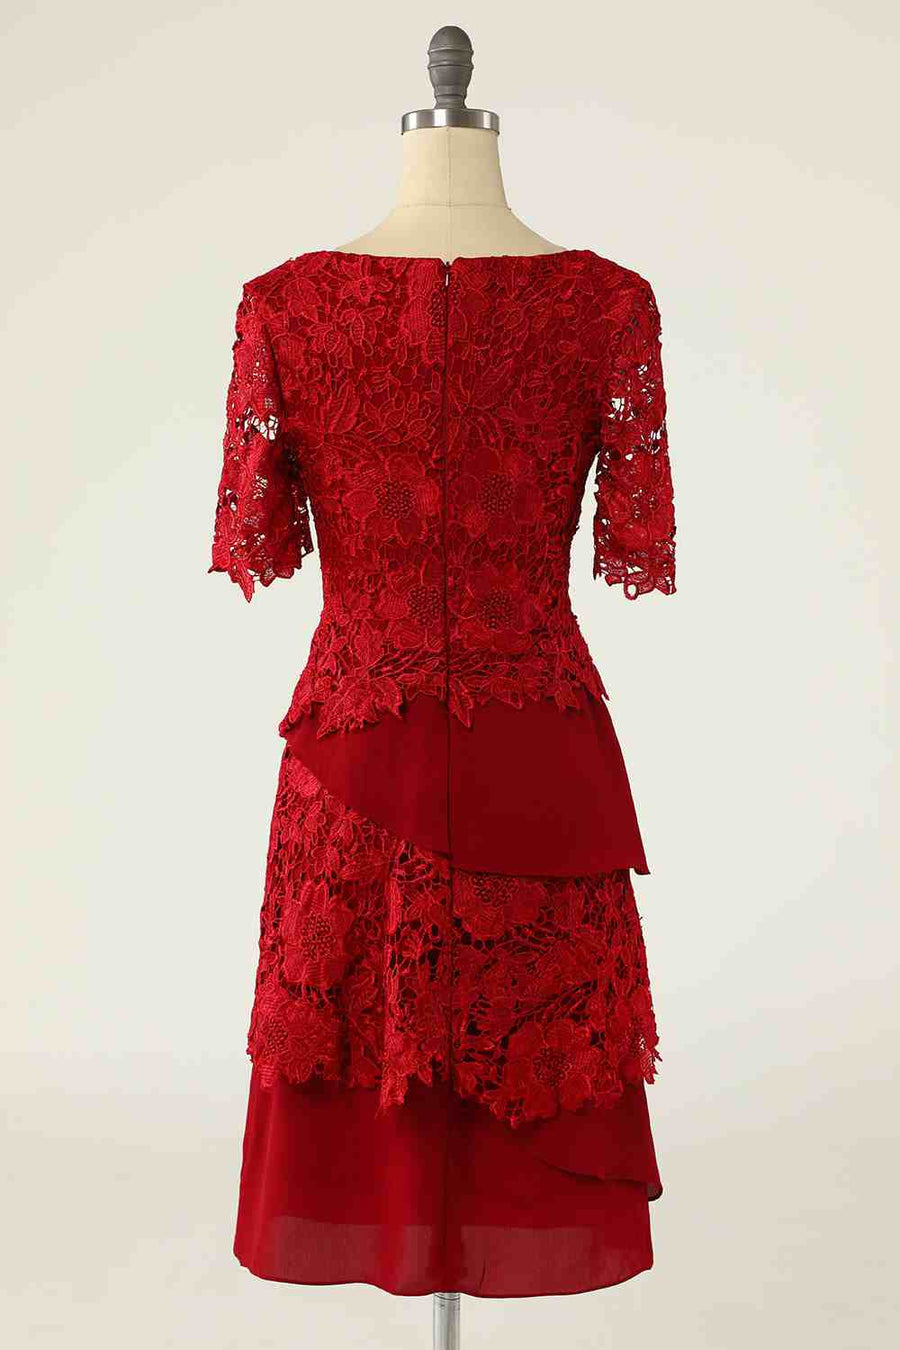 Two-Piece Red Lace Short Mother of the Bride Dress with Snap Cardigan